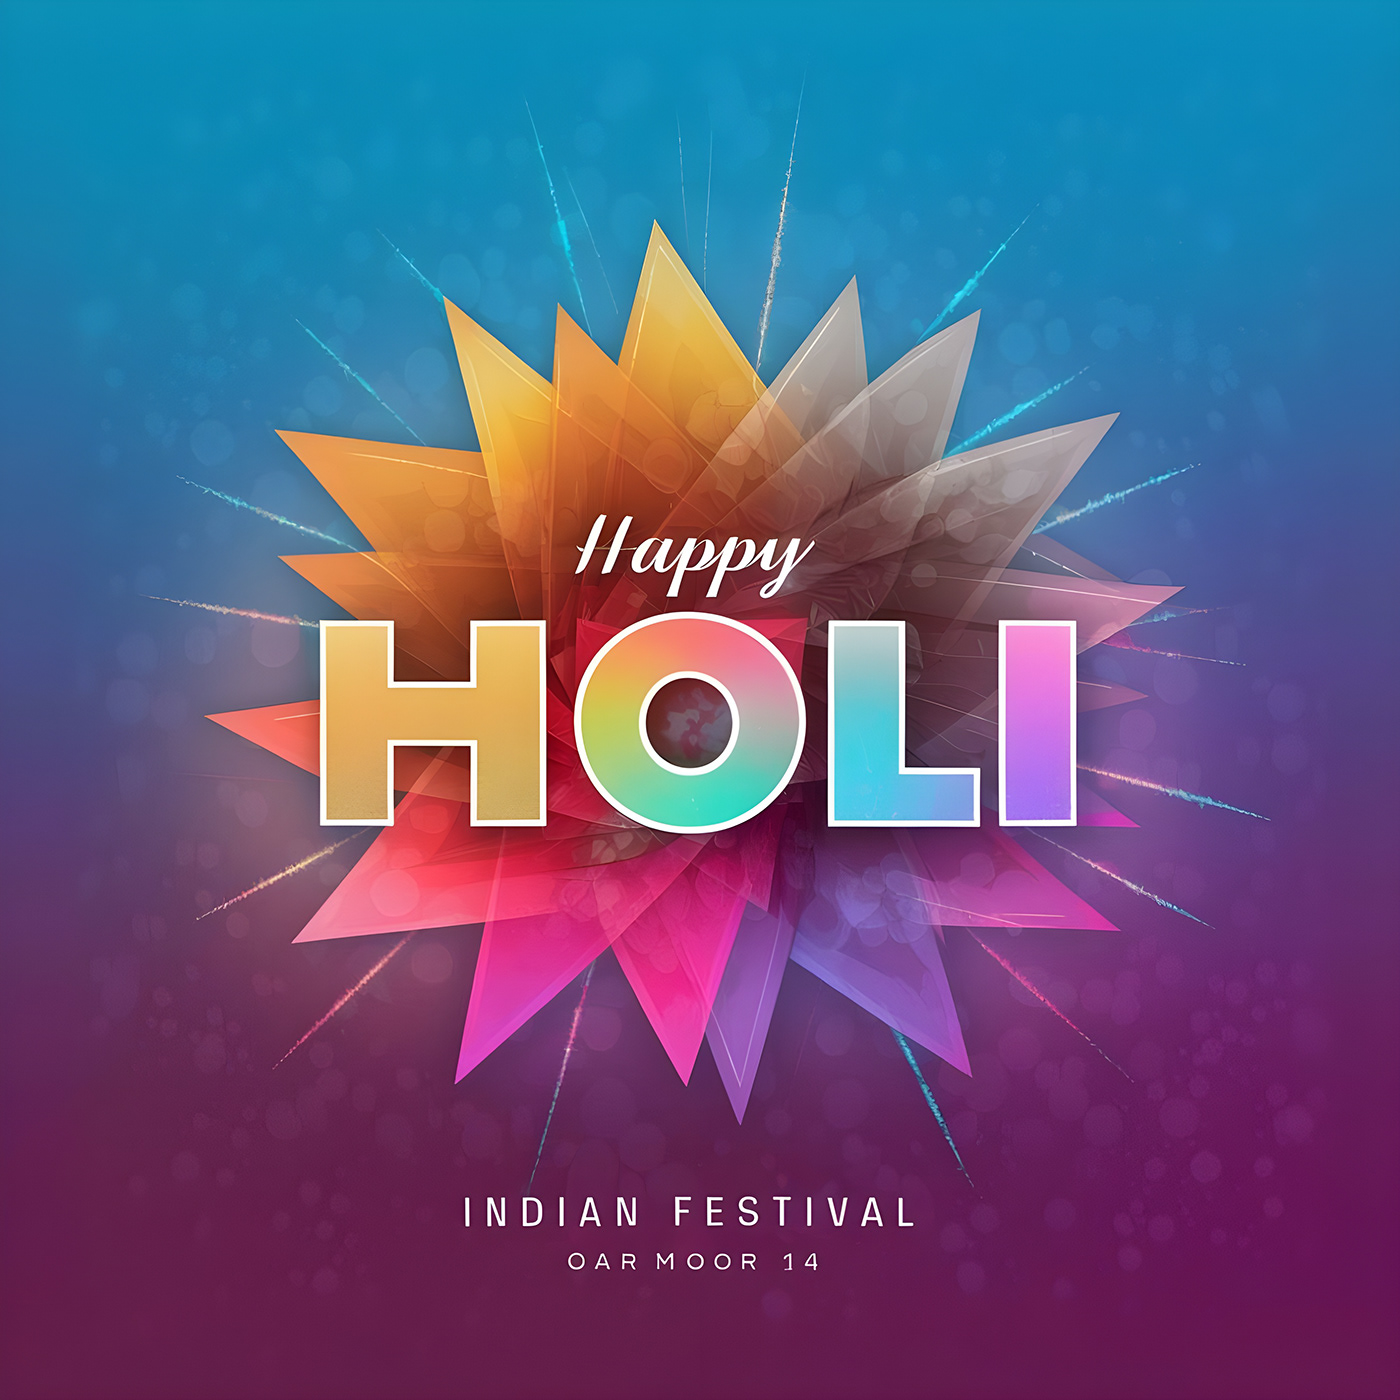 happy holi festival Social media post Graphic Designer Advertising  holi colours abstract colorful India